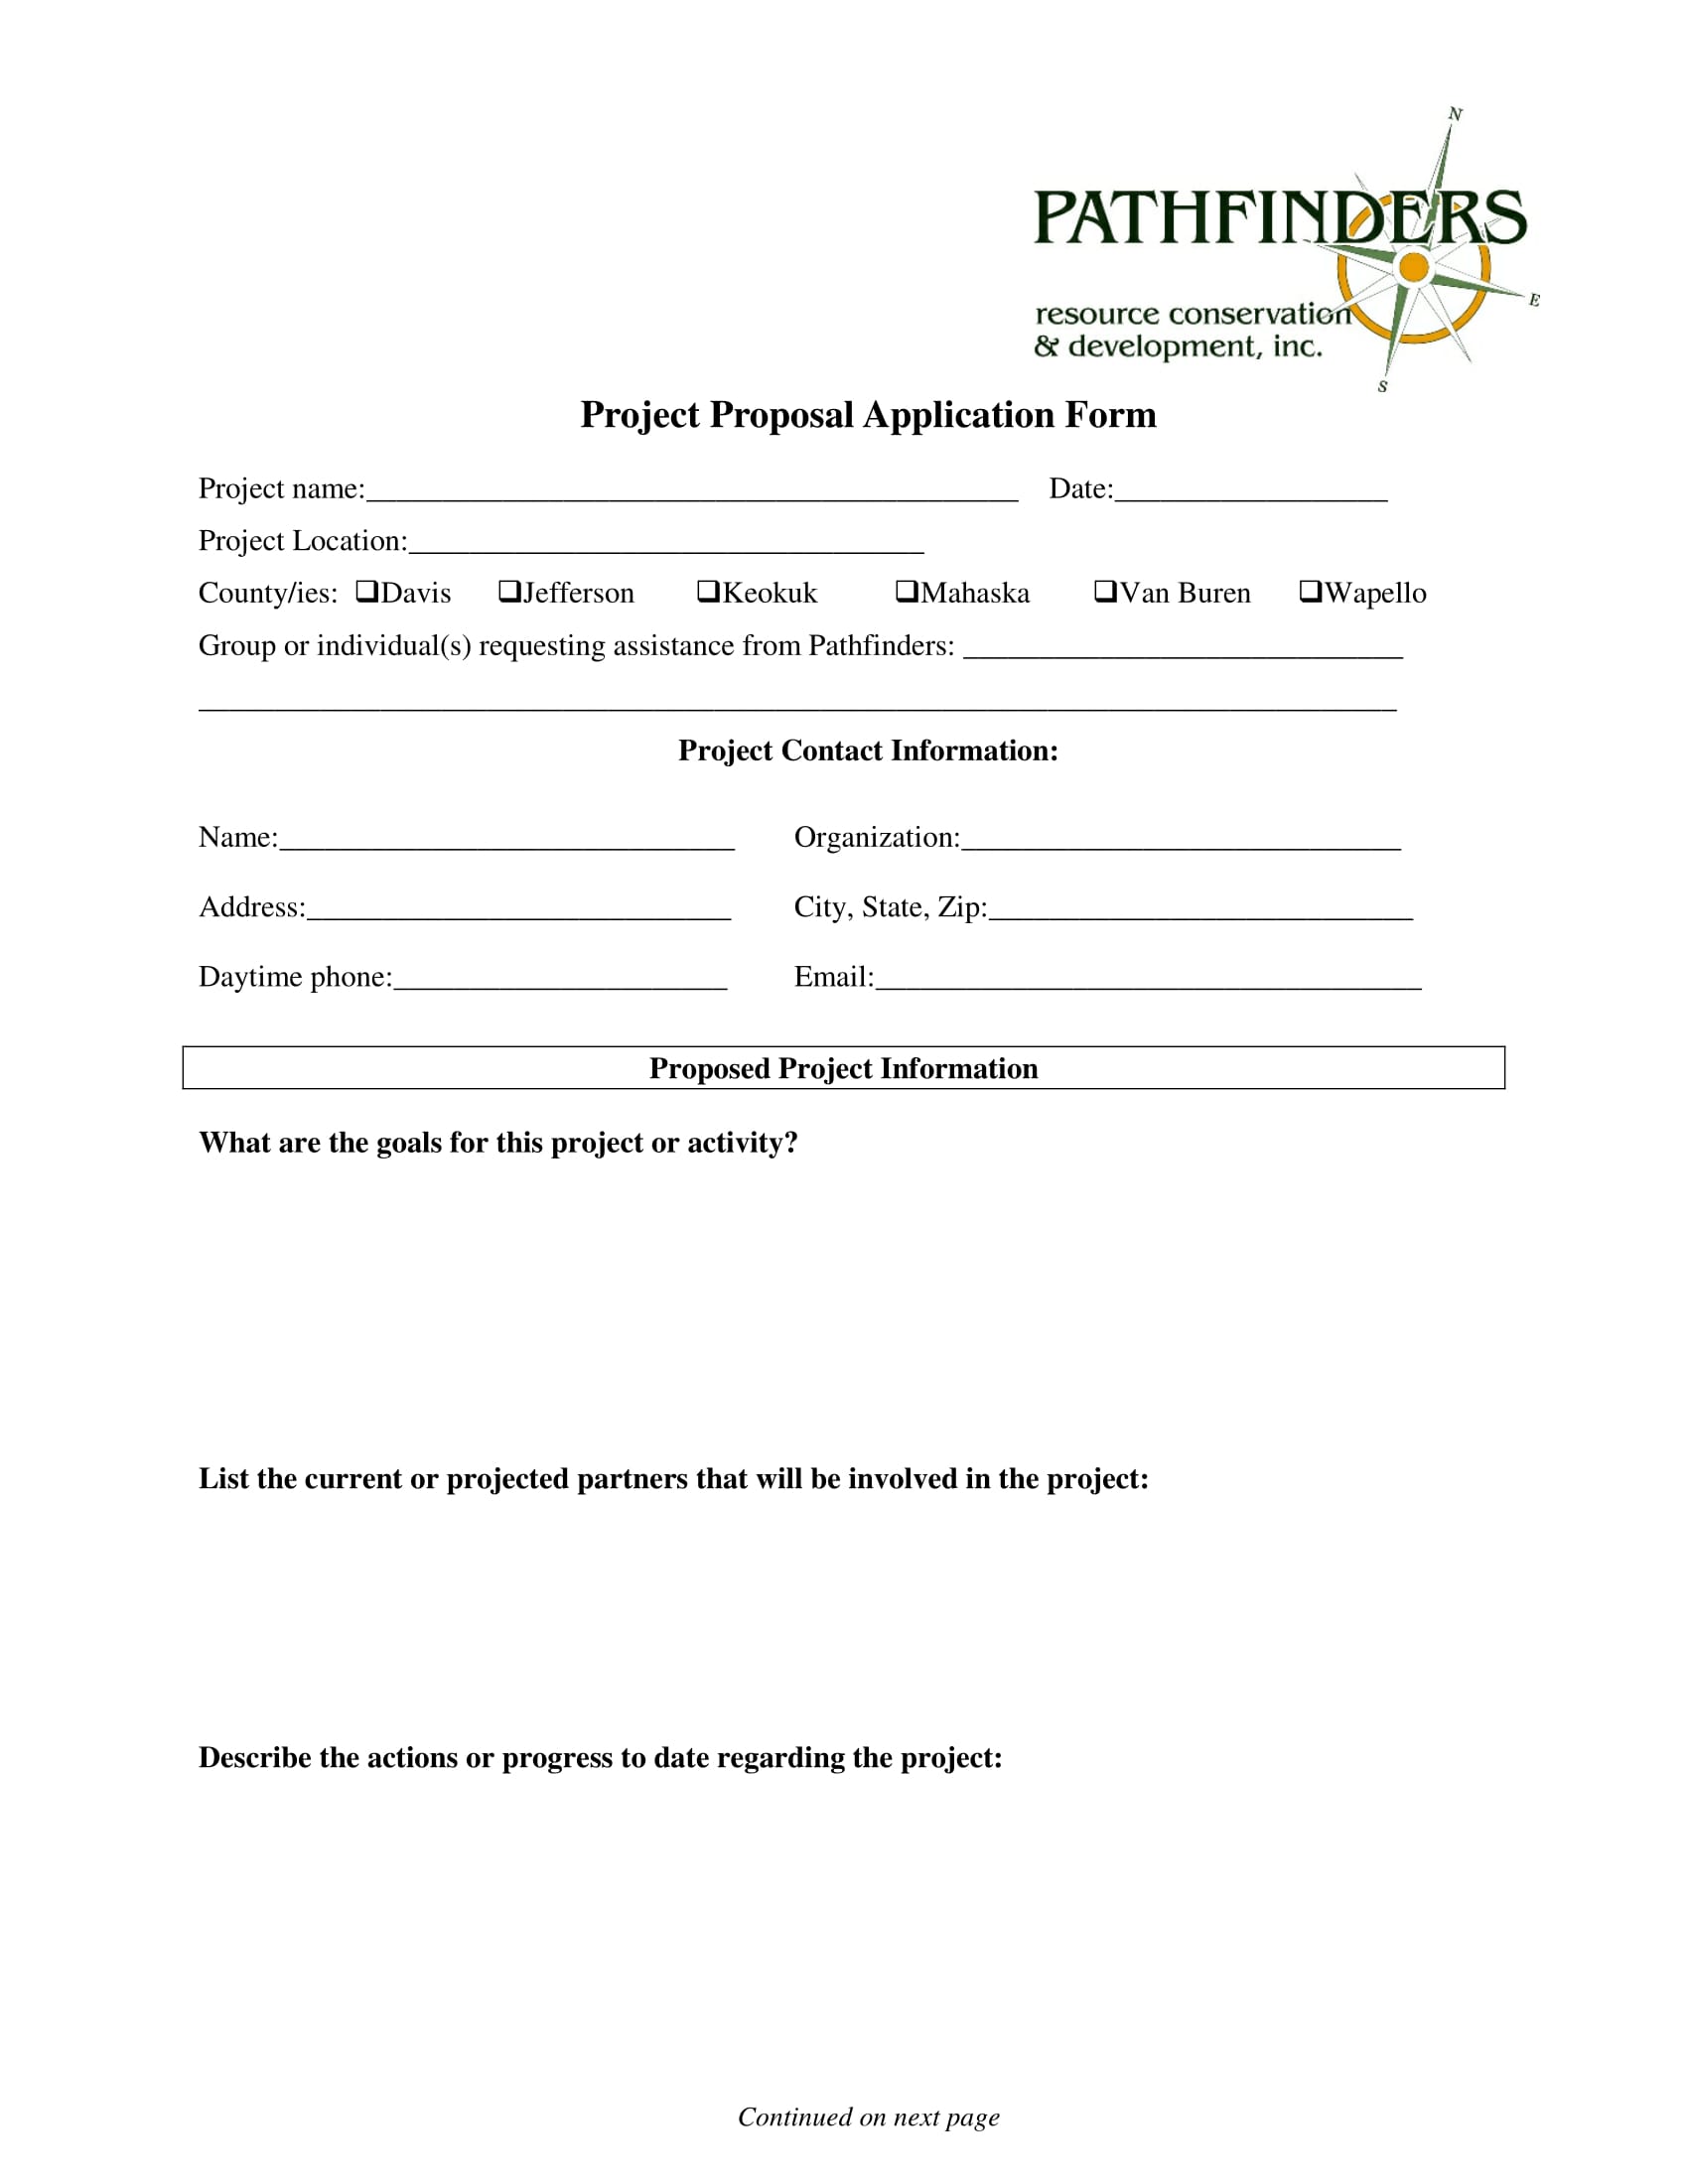 project proposal application form 1